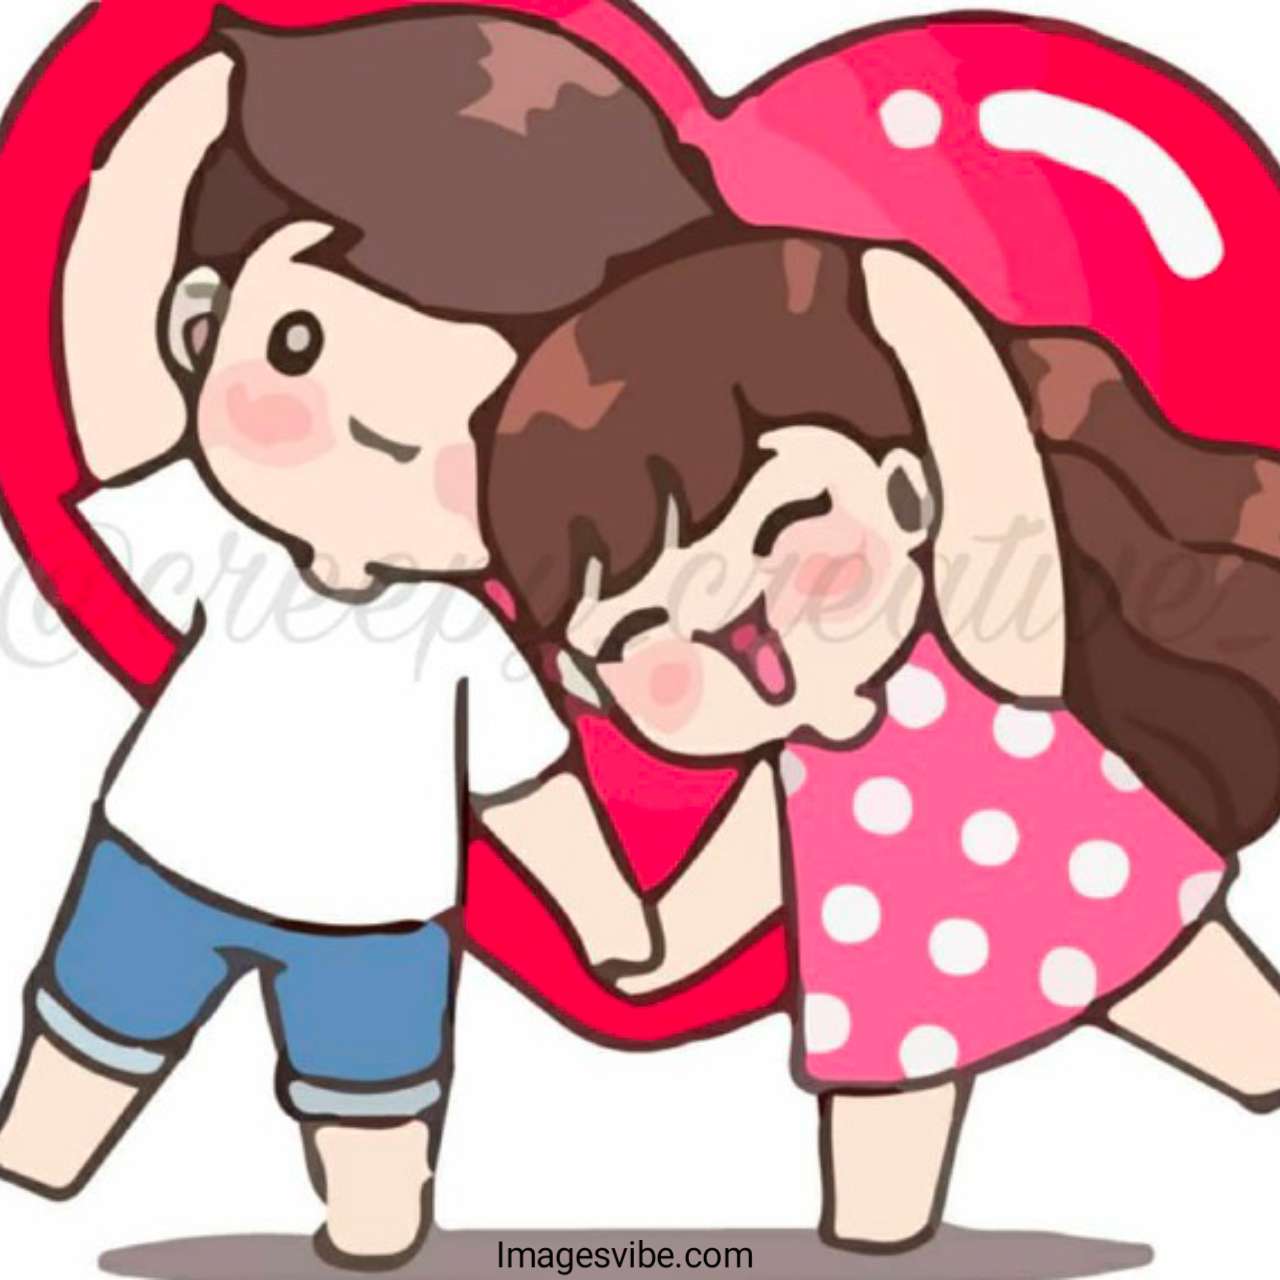 Best 30+ Couple Cartoon Images & Love story - Images Vibe